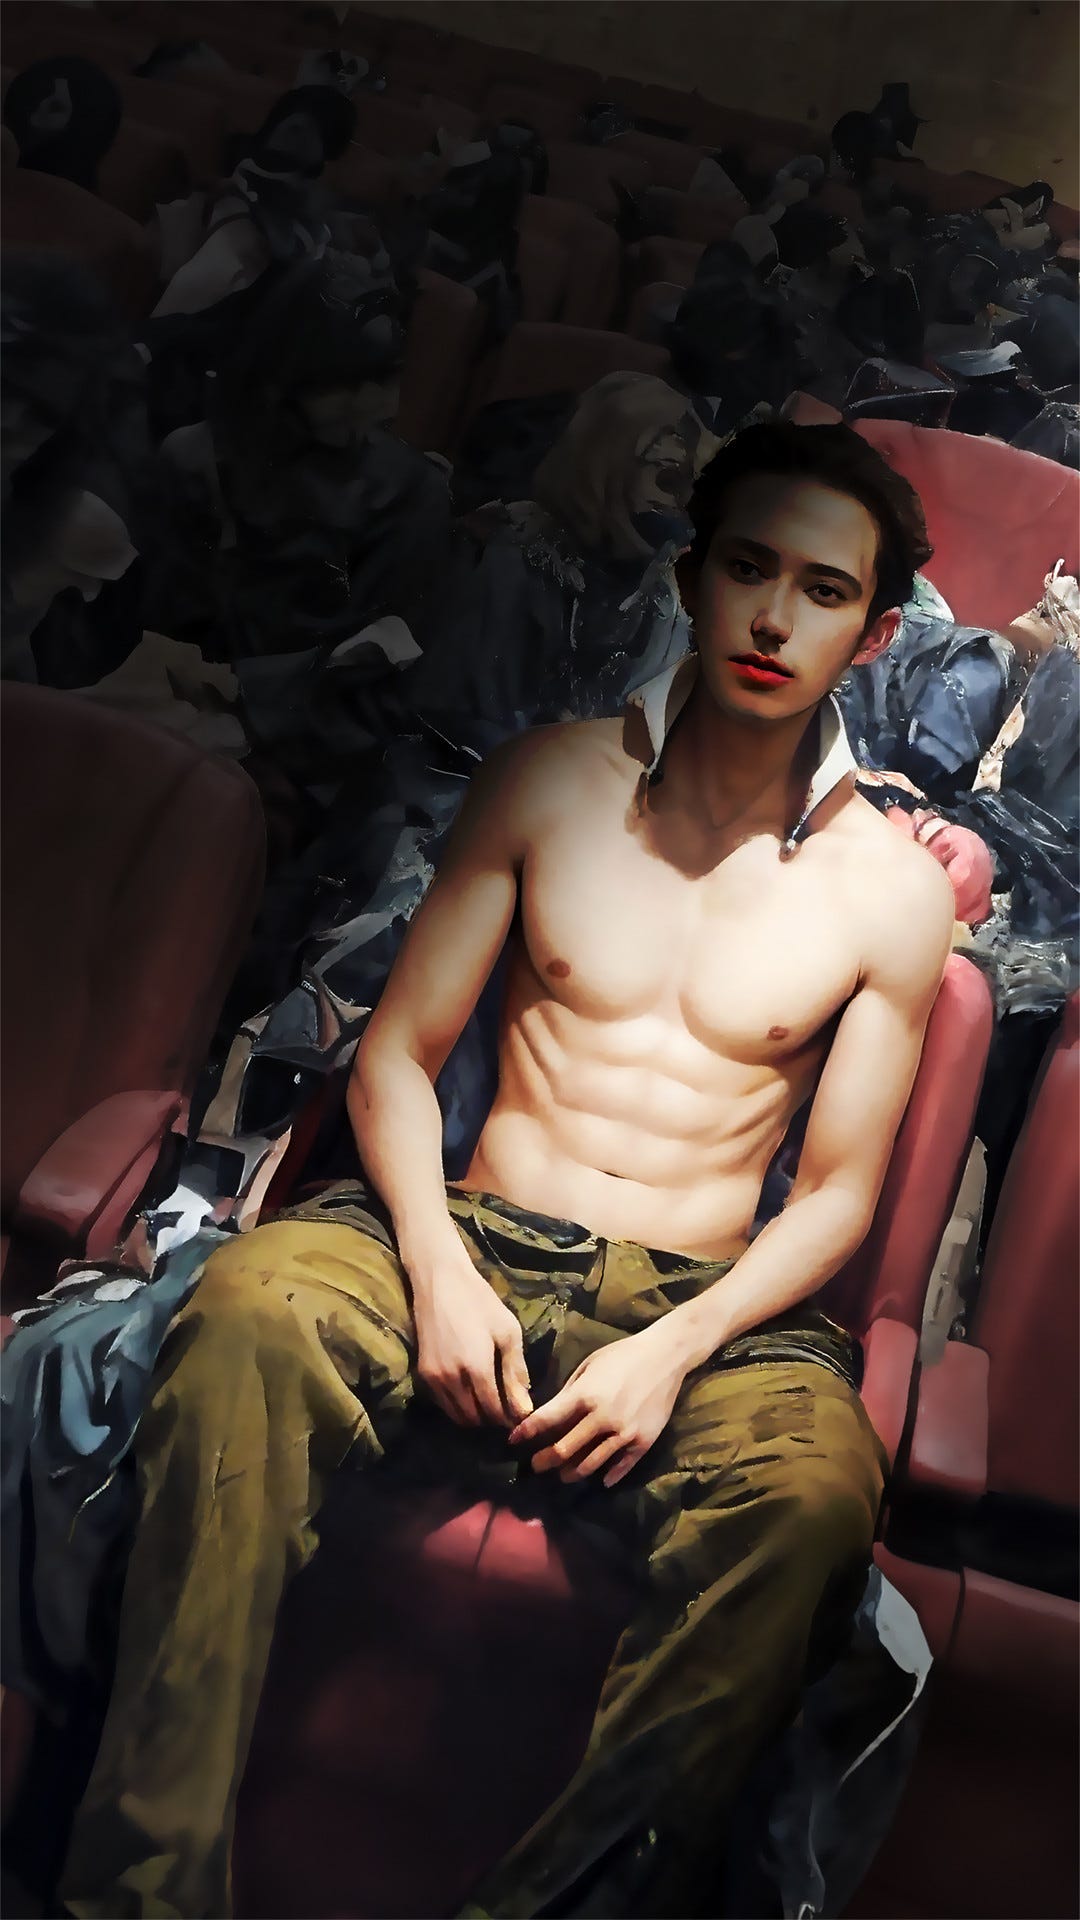 "In the Back Row..." portrays a shirtless late-20s white male seated in a darkened theater, the dim silhouettes of an audience around him, faces obscured and indistinct. Digital tools included AI. The young man's exposed torso and open posture contrast sharply with the anonymity and concealment of the figures in the shadows, reflecting the vulnerability and exposure often felt by those who live with autism as they navigate social settings. This image encapsulates the themes from the tale of an autistic adult's moment of liberation—a poignant Halloween memory where the theater's darkness becomes a sanctuary, a place where one can unmask and embrace their authentic self amongst those who also diverge from the norm. The surrounding figures, vague and unfocused, emphasize the isolation that can accompany this unmasking, even in a crowd.